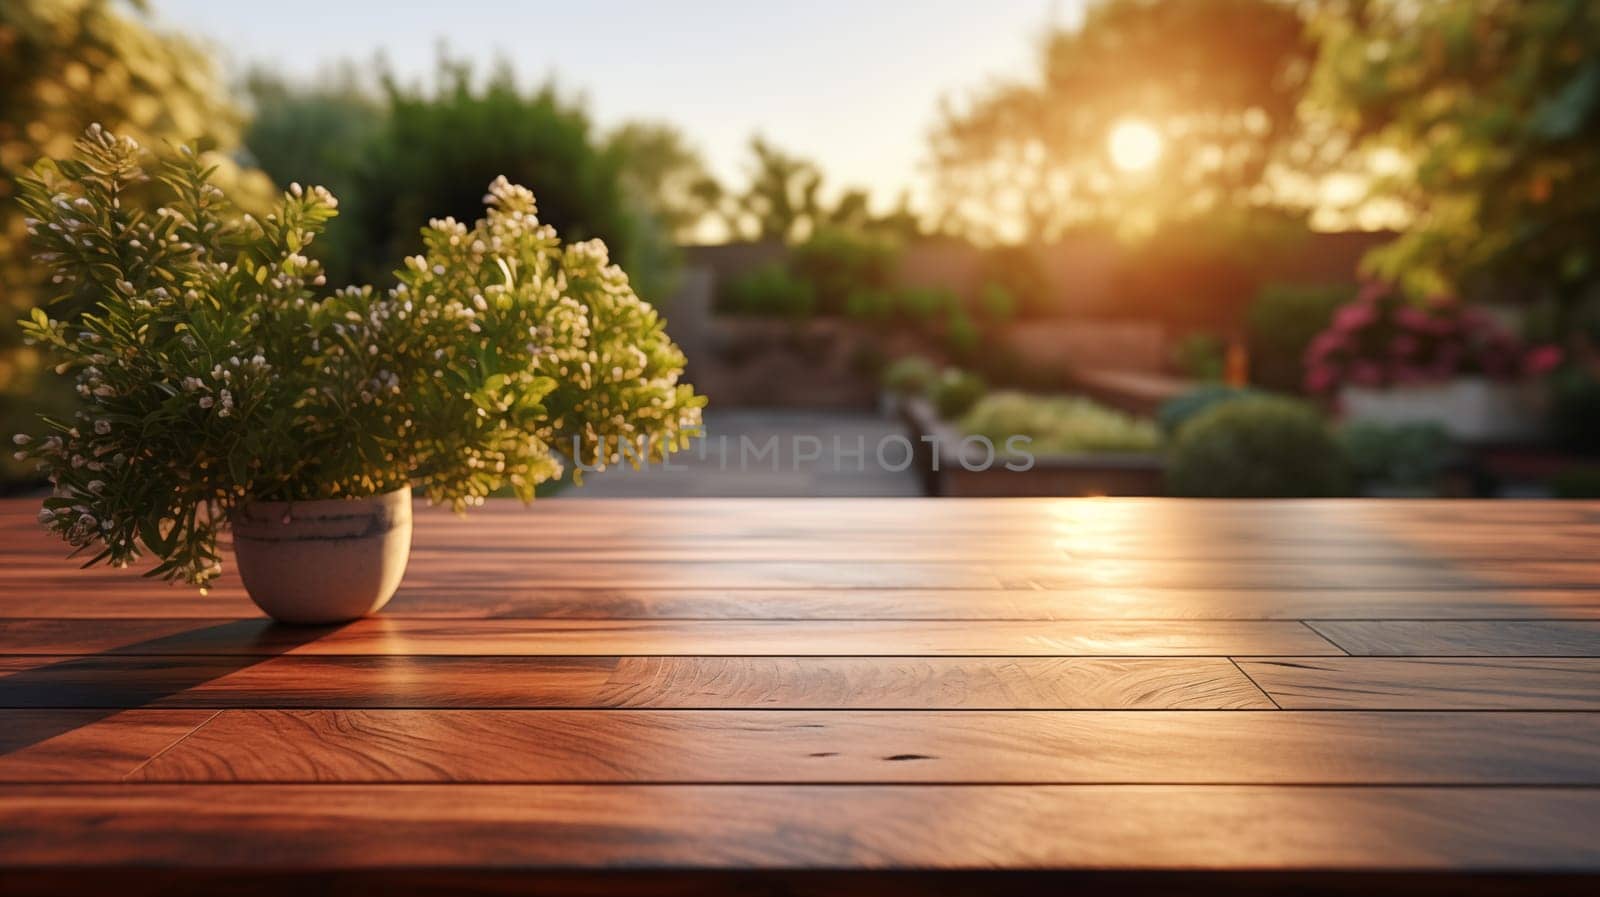 Peaceful garden scene with warm sunlit foliage and flowering plant on wooden table. by Zakharova